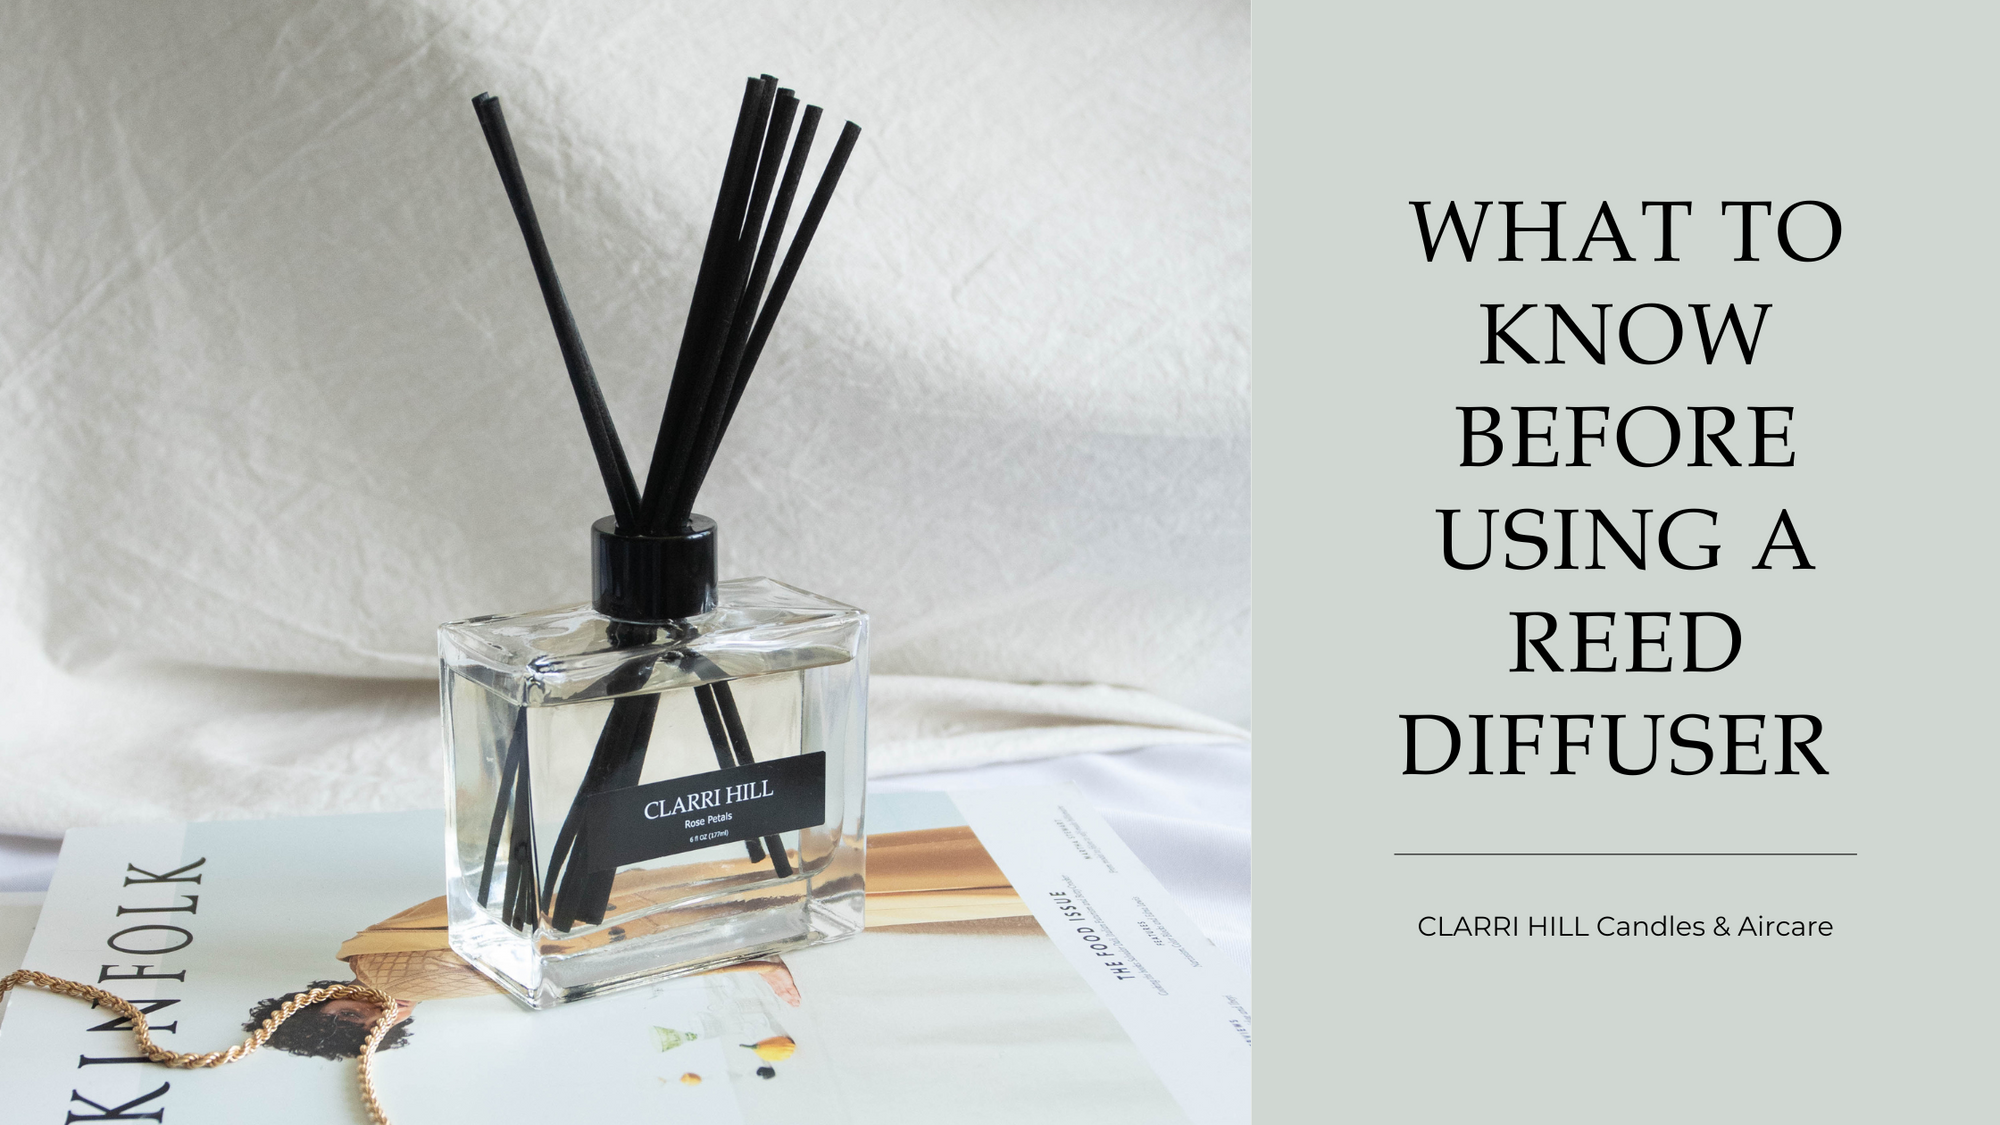 What to Know Before Using a Reed Diffuser